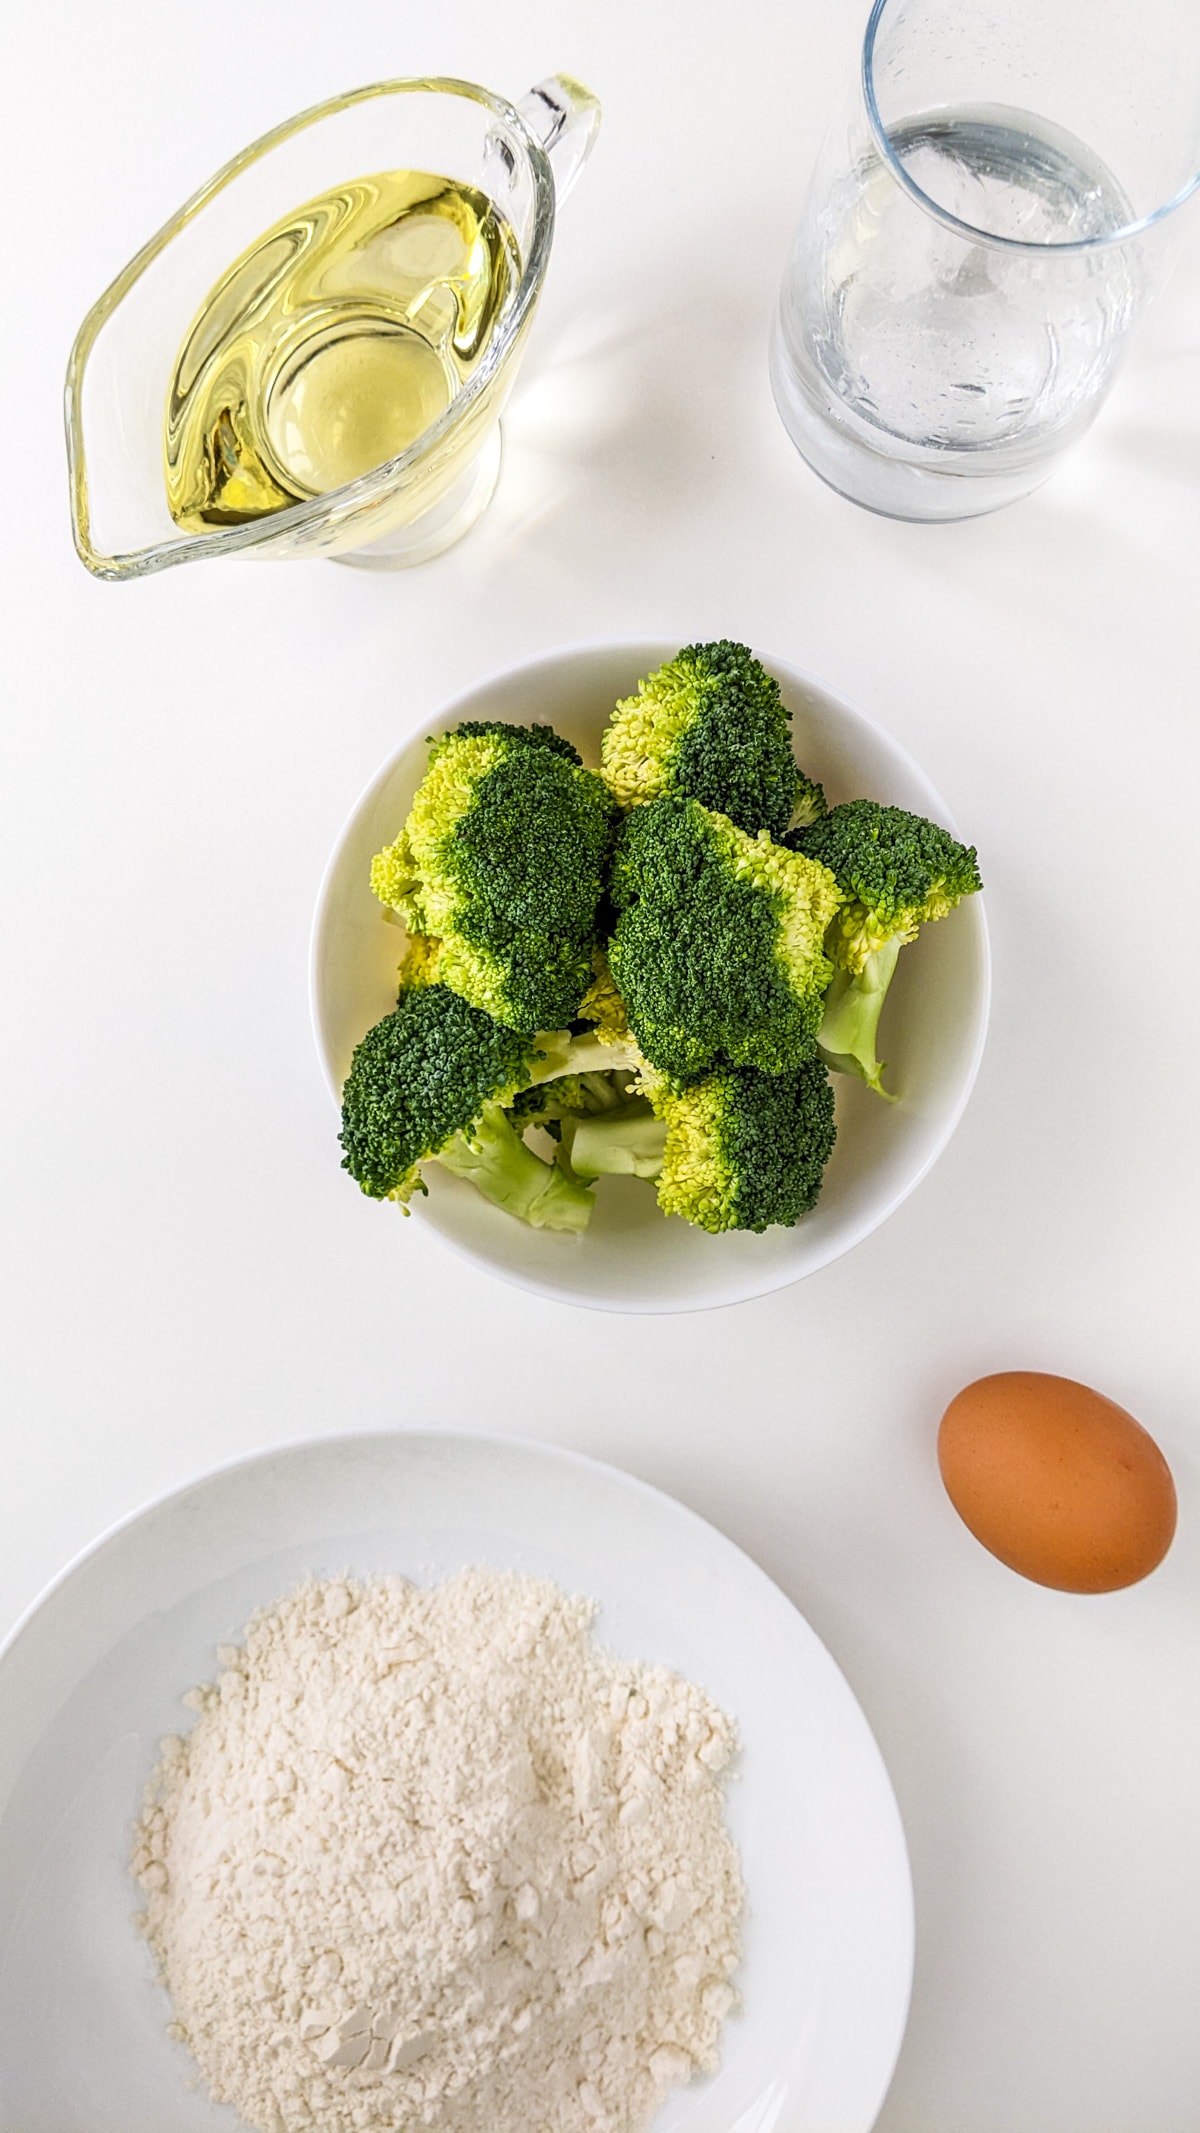 Top view of broccoli, oil, flour and an egg.